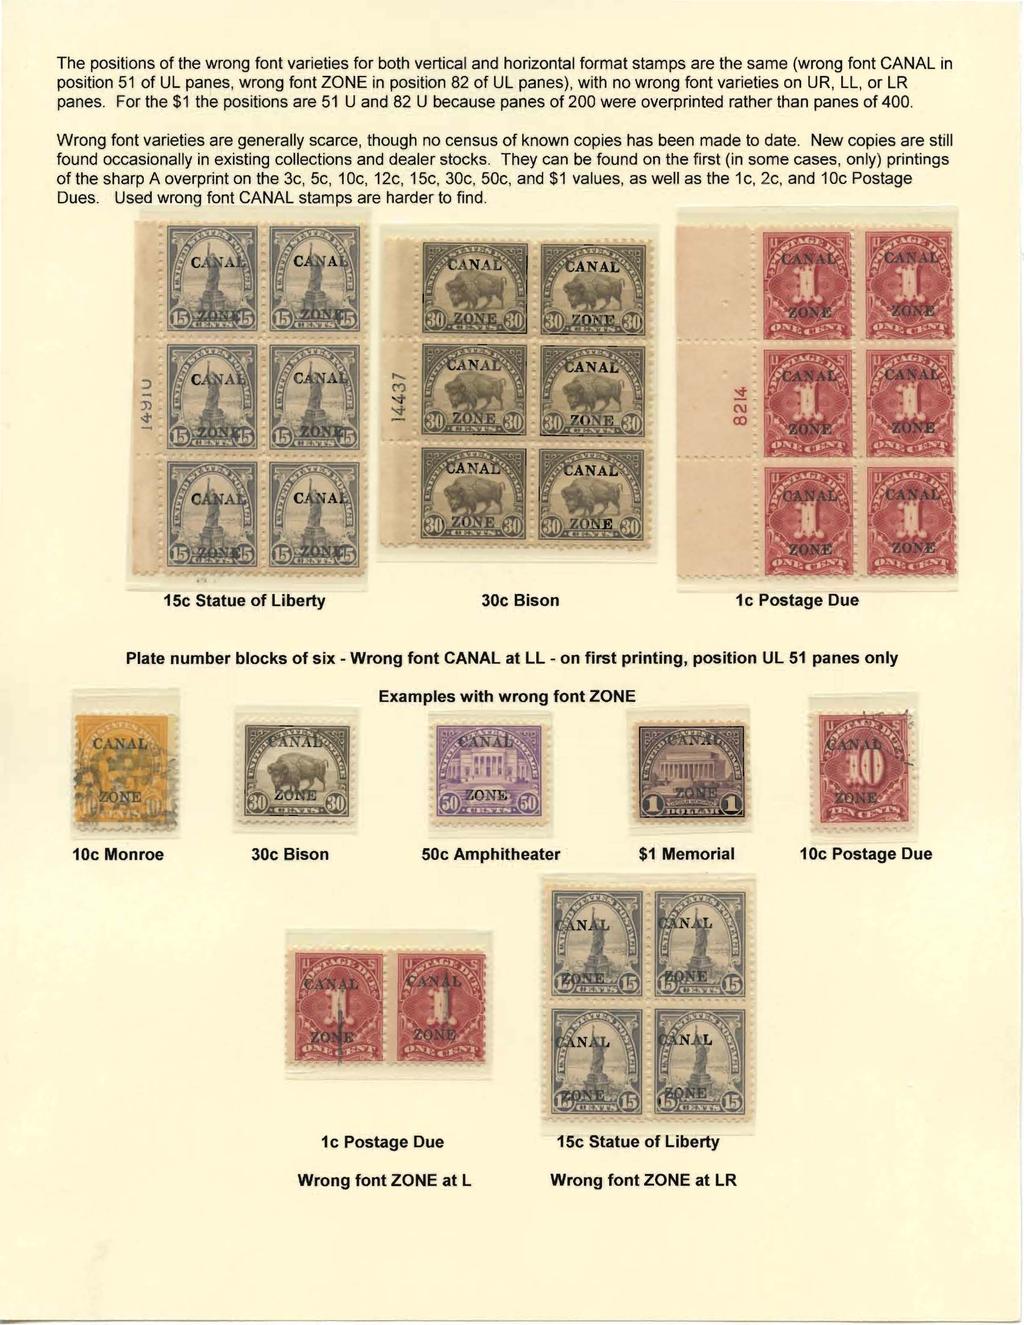 The positions of the wrong font varieties for both vertical and horizontal format stamps are the same (wrong font CANAL in position 51 of UL panes, wrong font ZONE in position 82 of UL panes), with